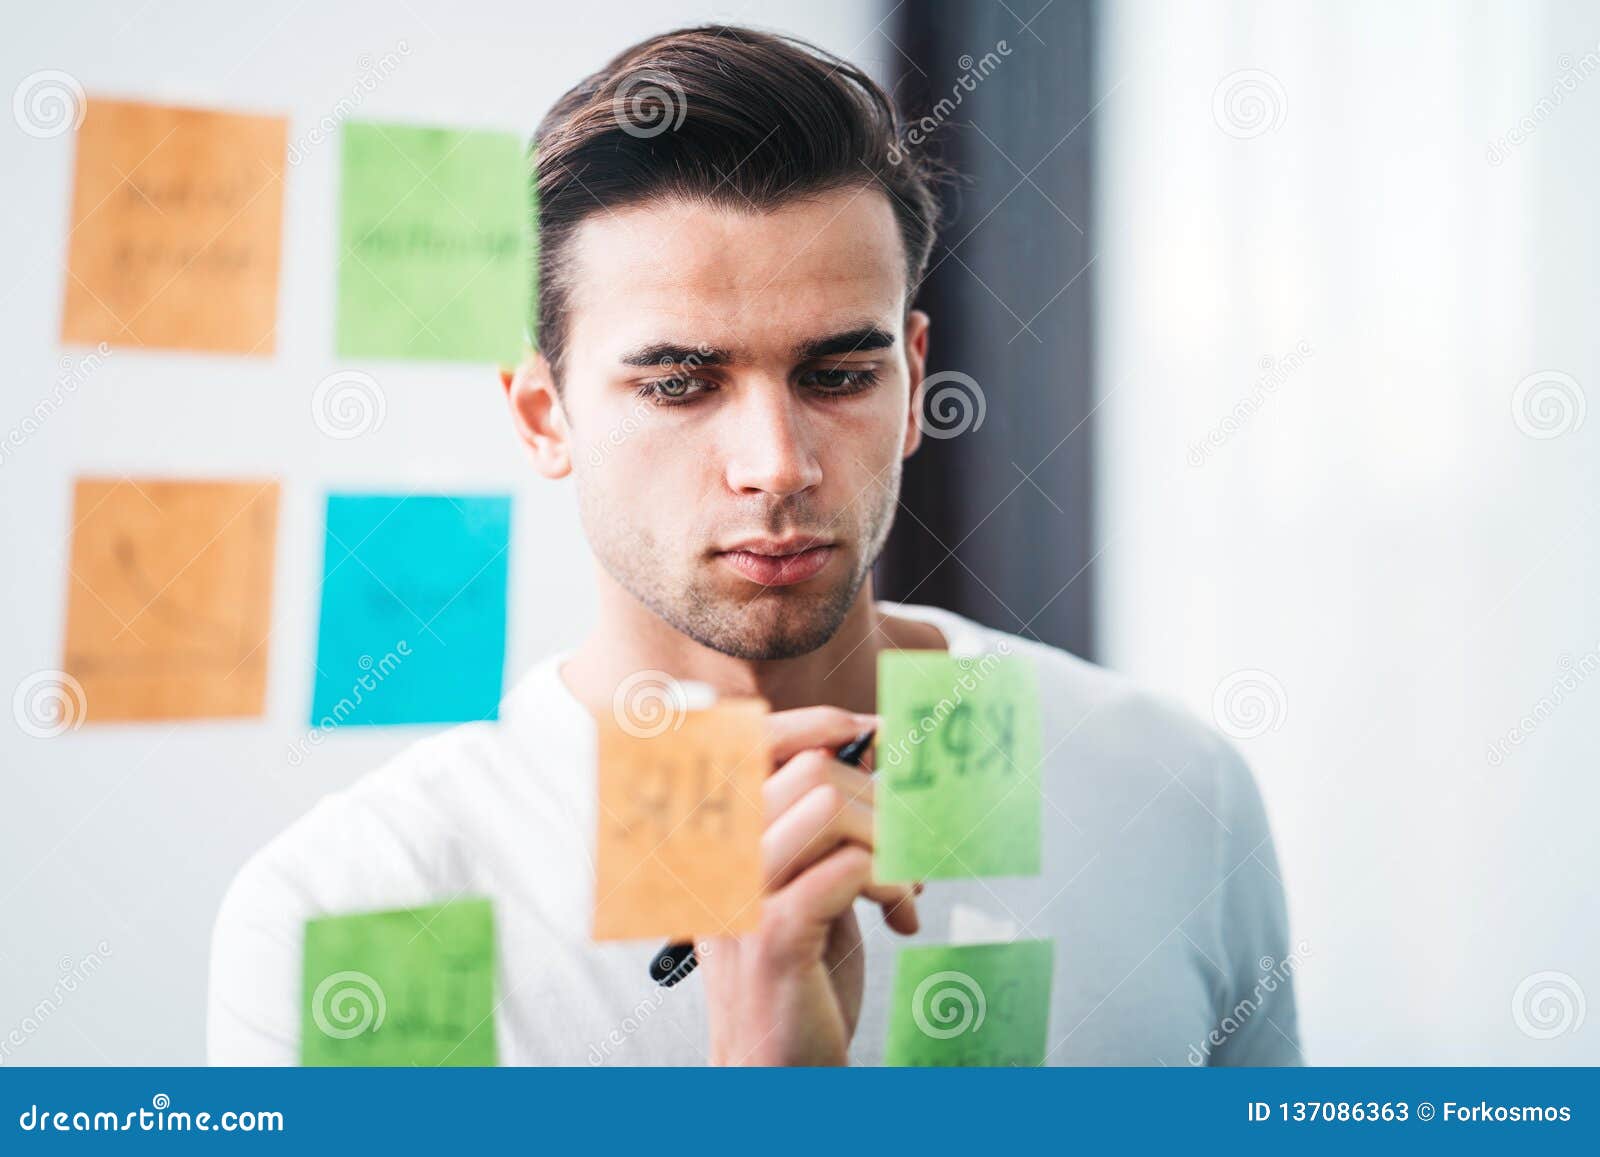 Creative Man Writing Sticky Note on Glass Wall at Office Space Stock Image  - Image of creative, management: 137086363